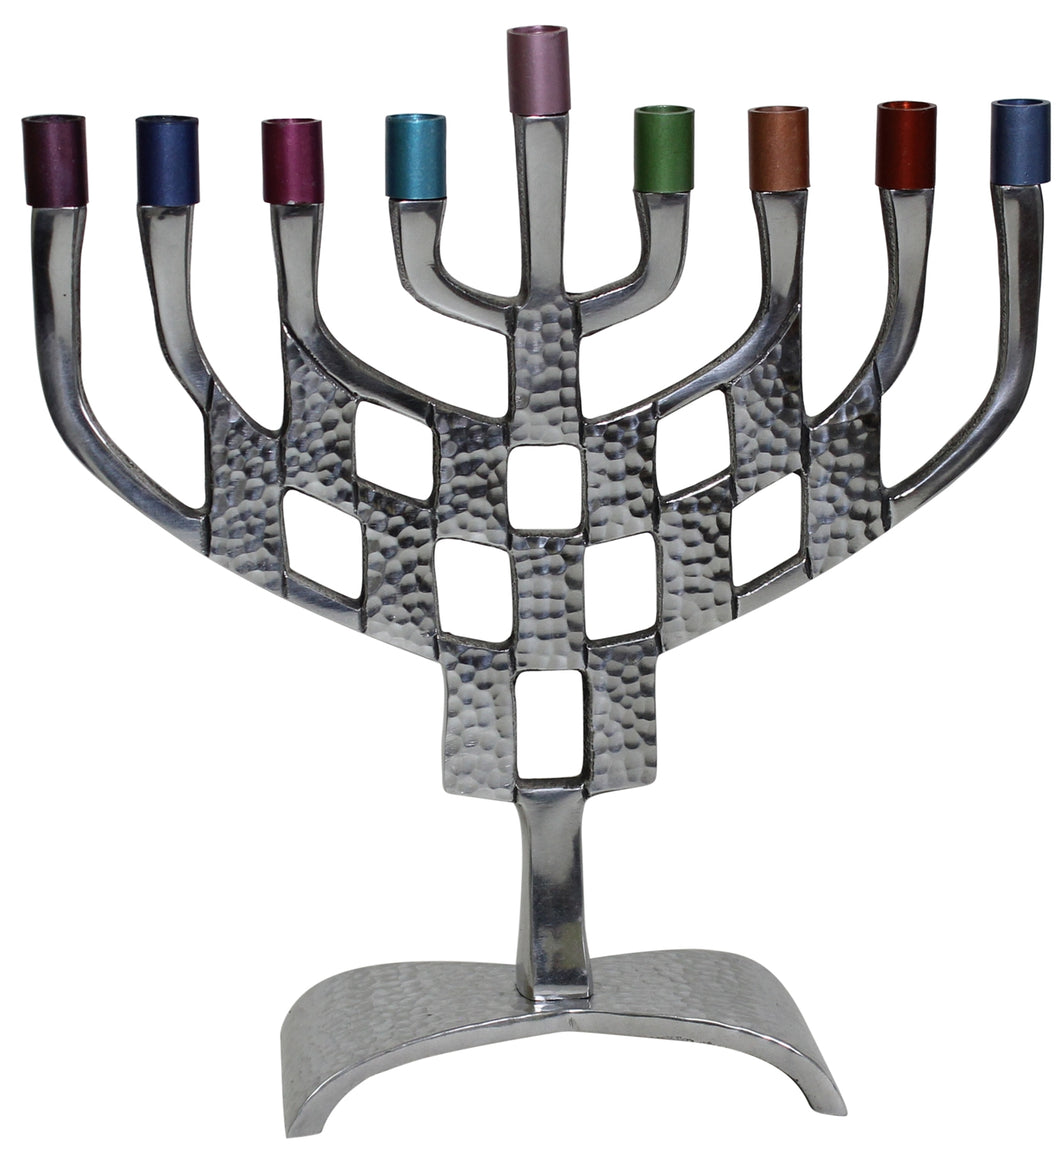 Silver Hammered Menorah with Multi-Color Metallic Tips - 9